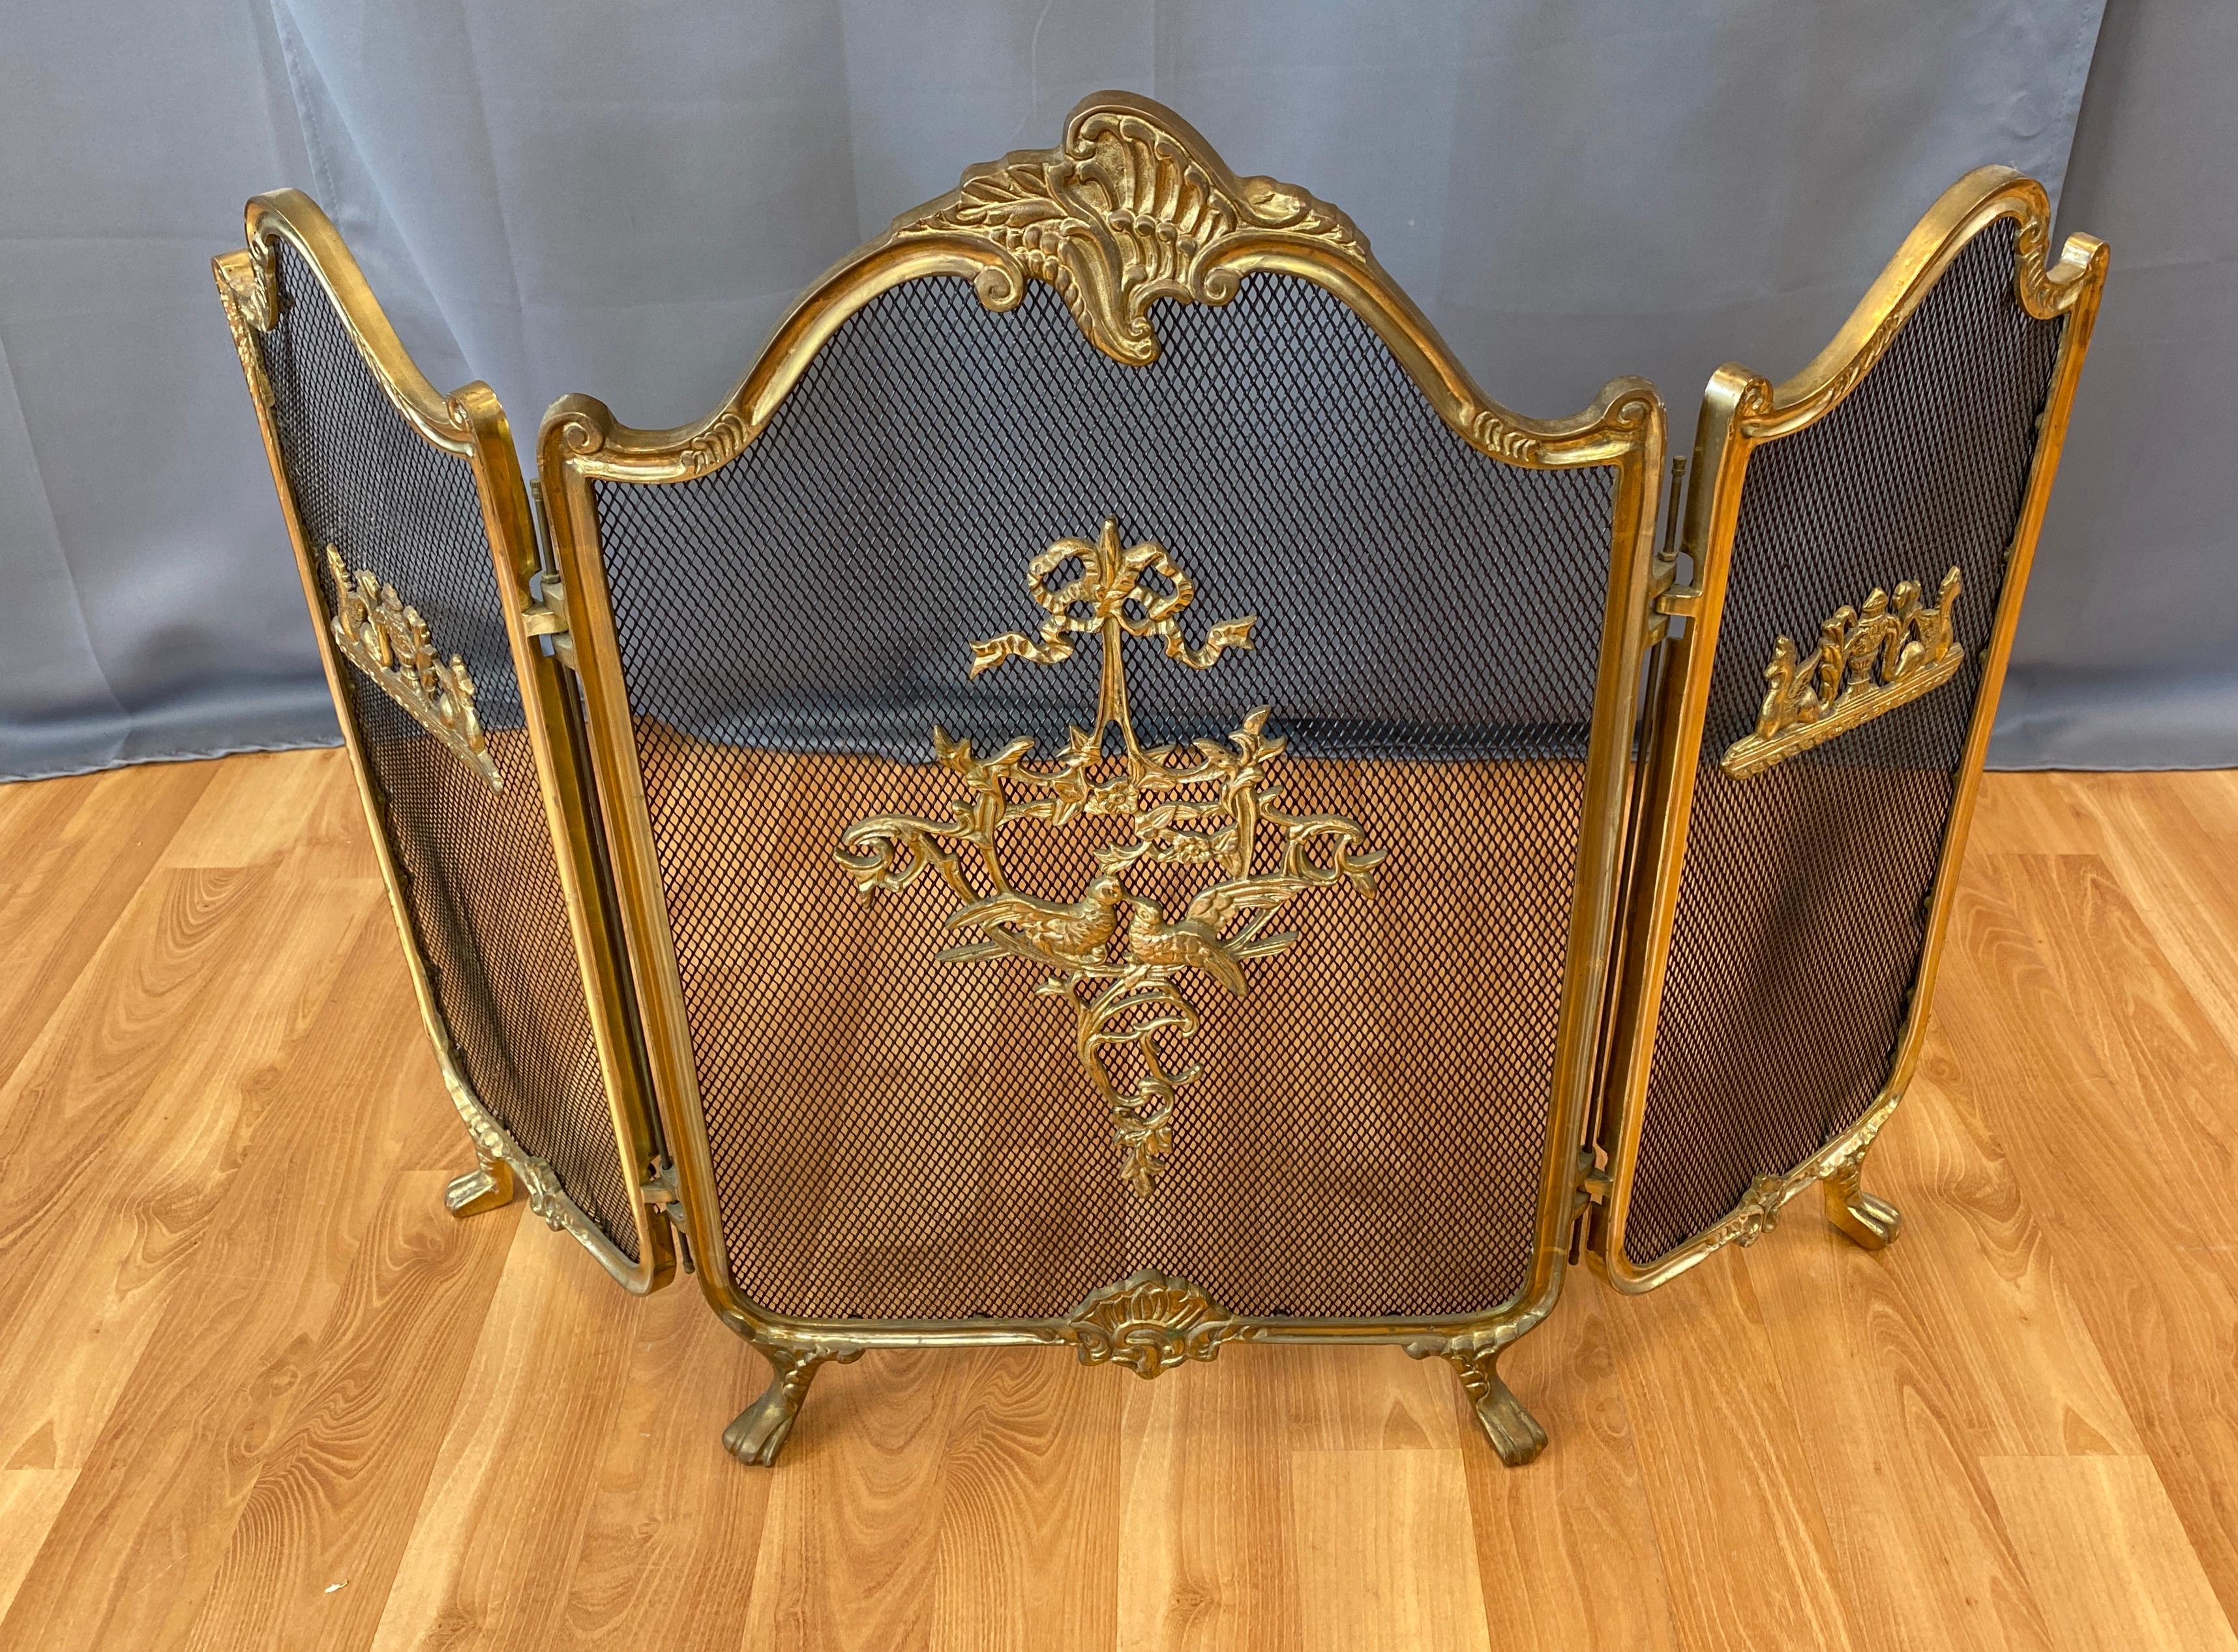 Vintage French Provincial style brass folding fireplace screen.
Large middle screen, with a smaller one on each side of, heavy brass casting design 
just about in the middle of each screen.

Measures: Large middle screen 18 x 28 3/4 high
Side